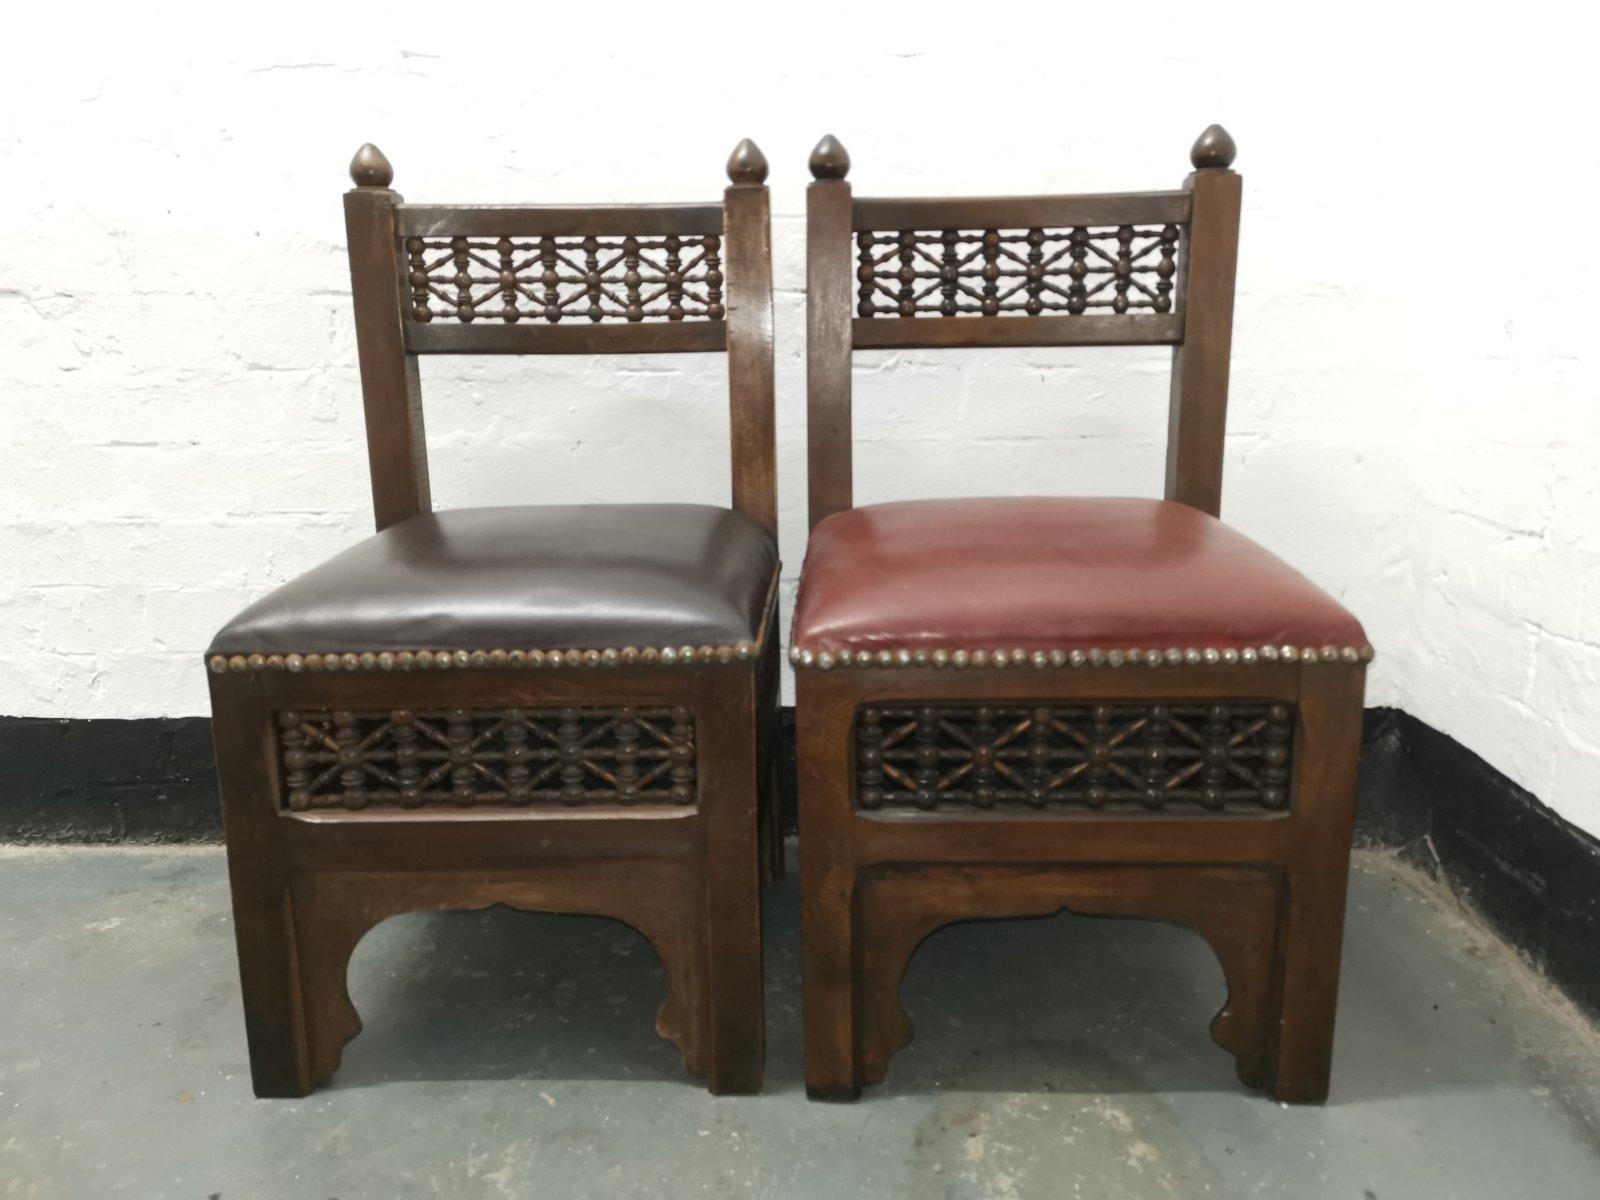 Liberty & Co.
Two good quality Moorish side or child's chair with Mashrabiya turned details to the backrest and on all four sides below the seats, one with a black studded leather seat, and one with a red studded leather seat, both with Moorish